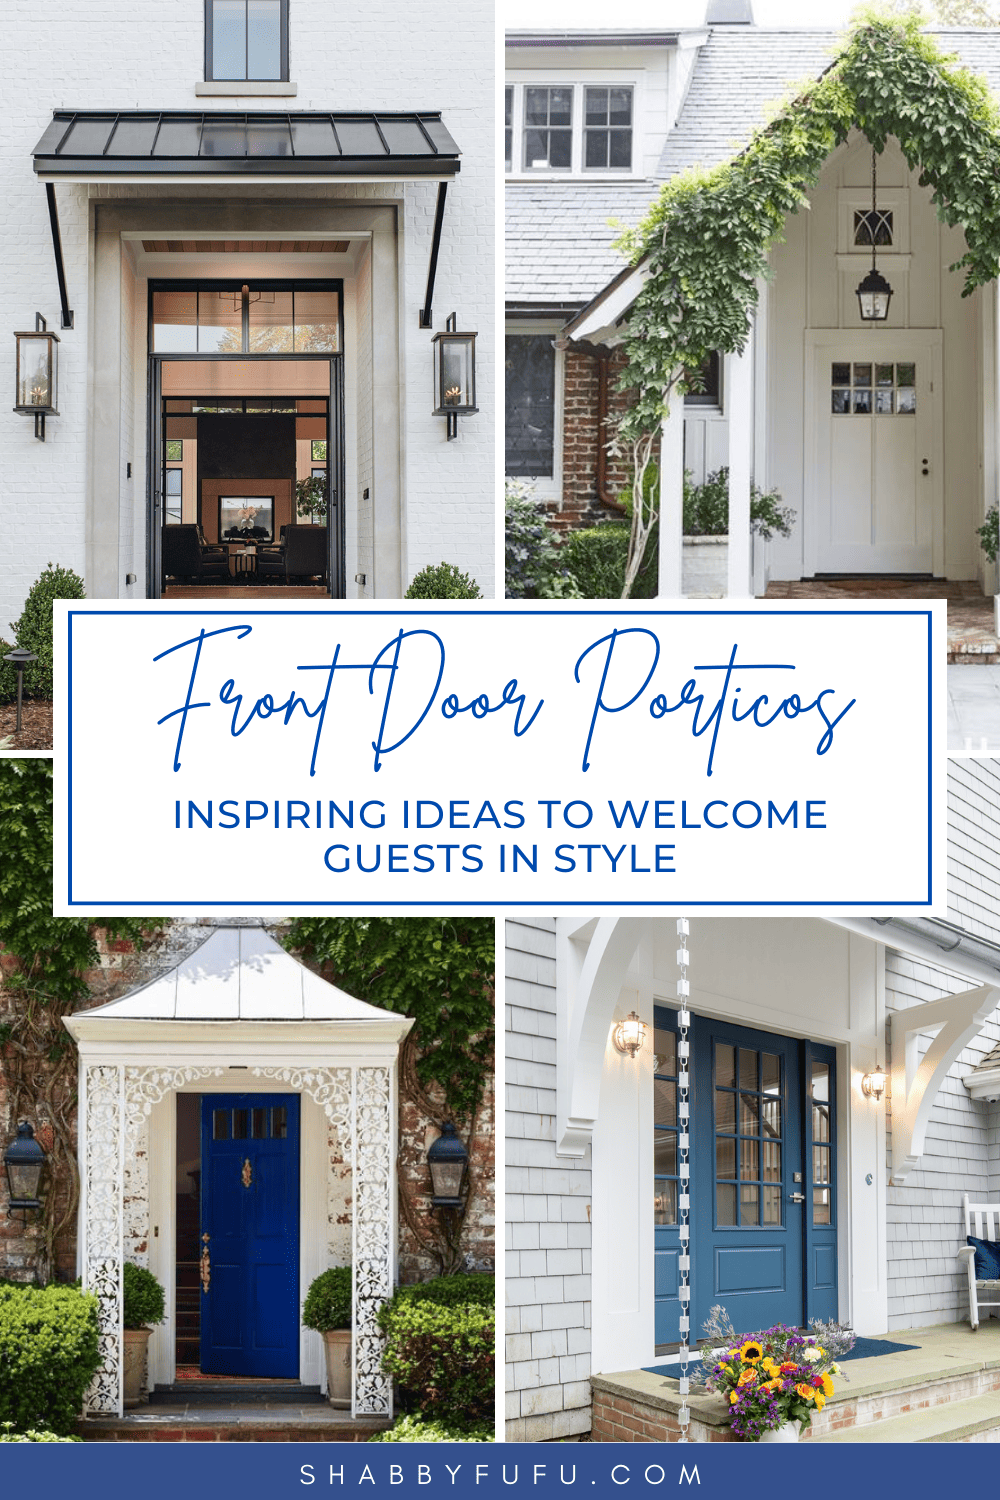 Front Door Portico collage for Pinterest graphic